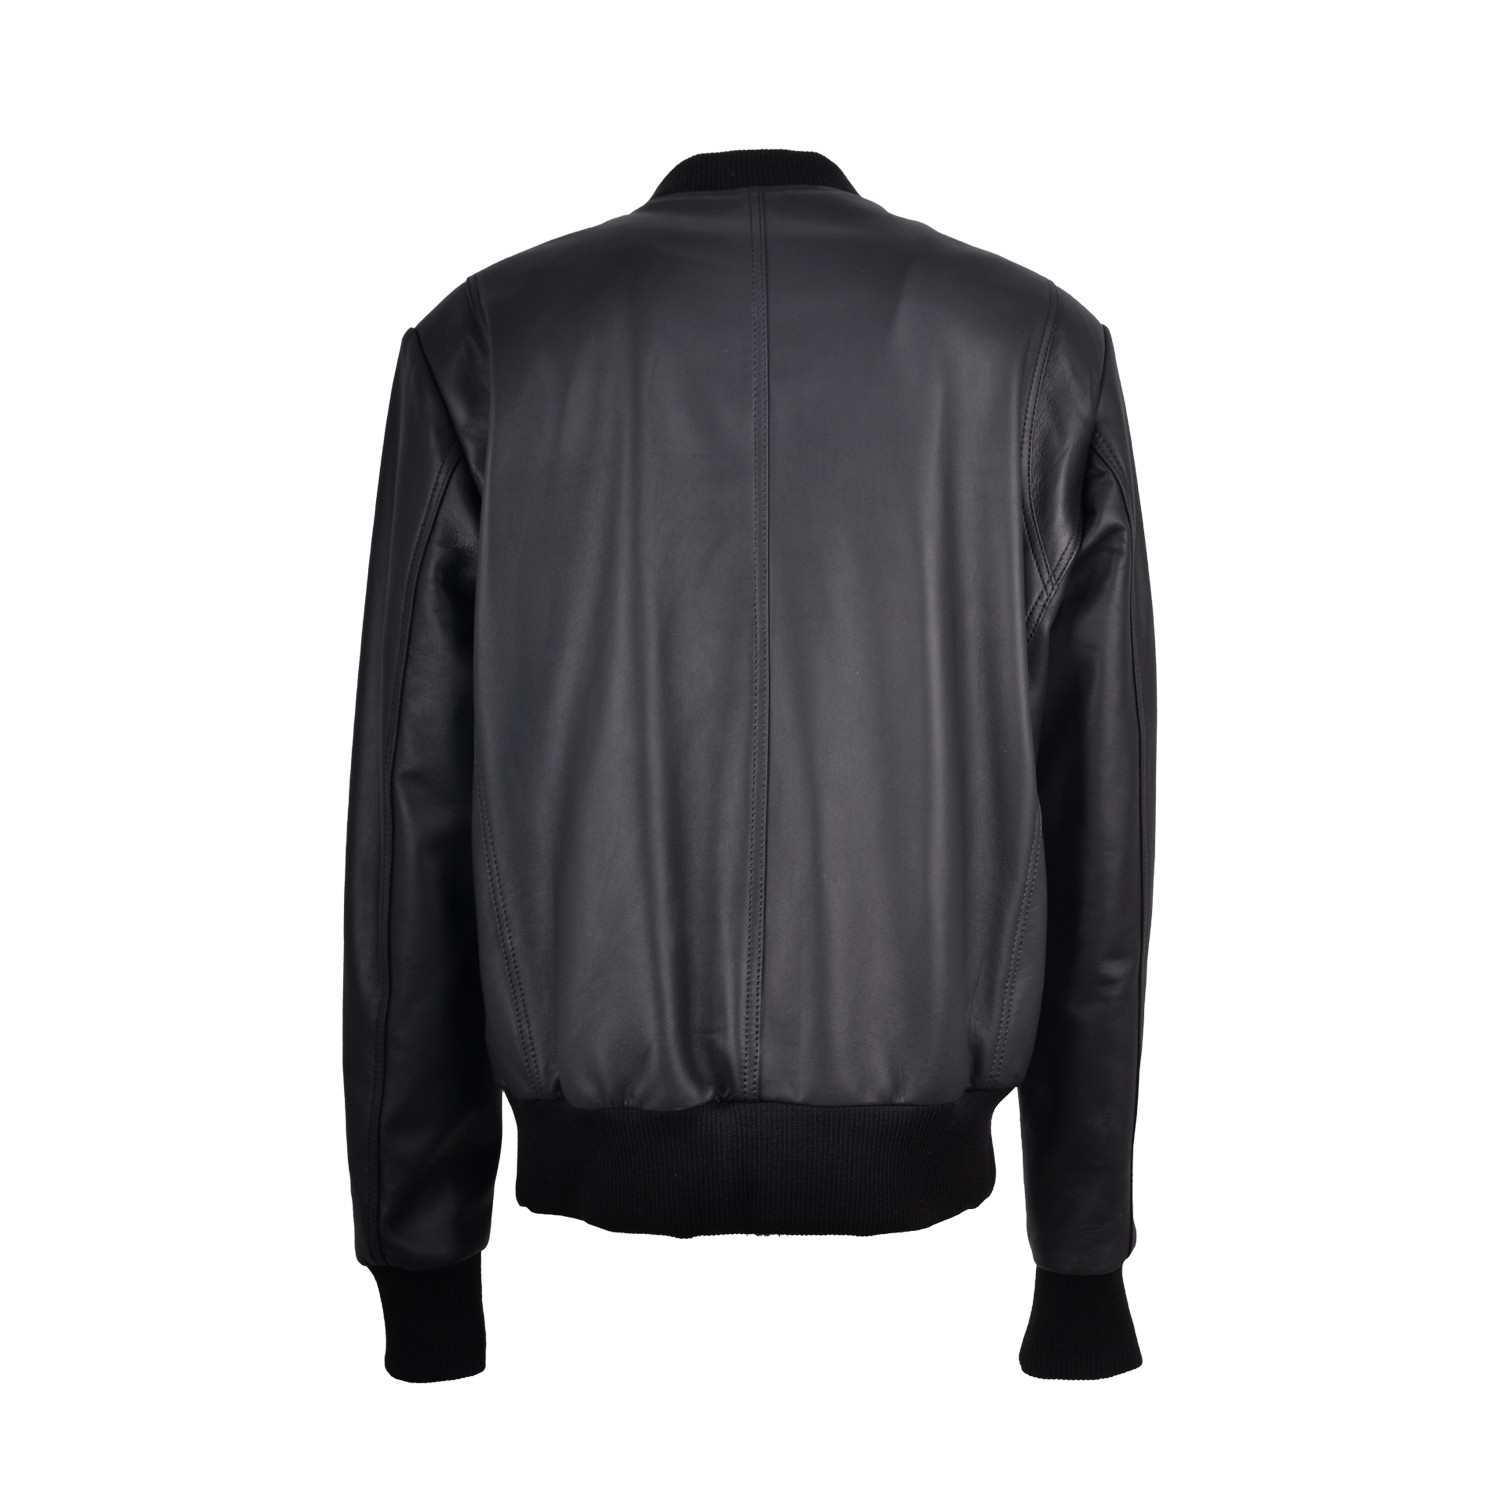 Classic College Model Genuine Leather Jacket for Men Handcrafted Black Soft Lambskin Outerwear Colin